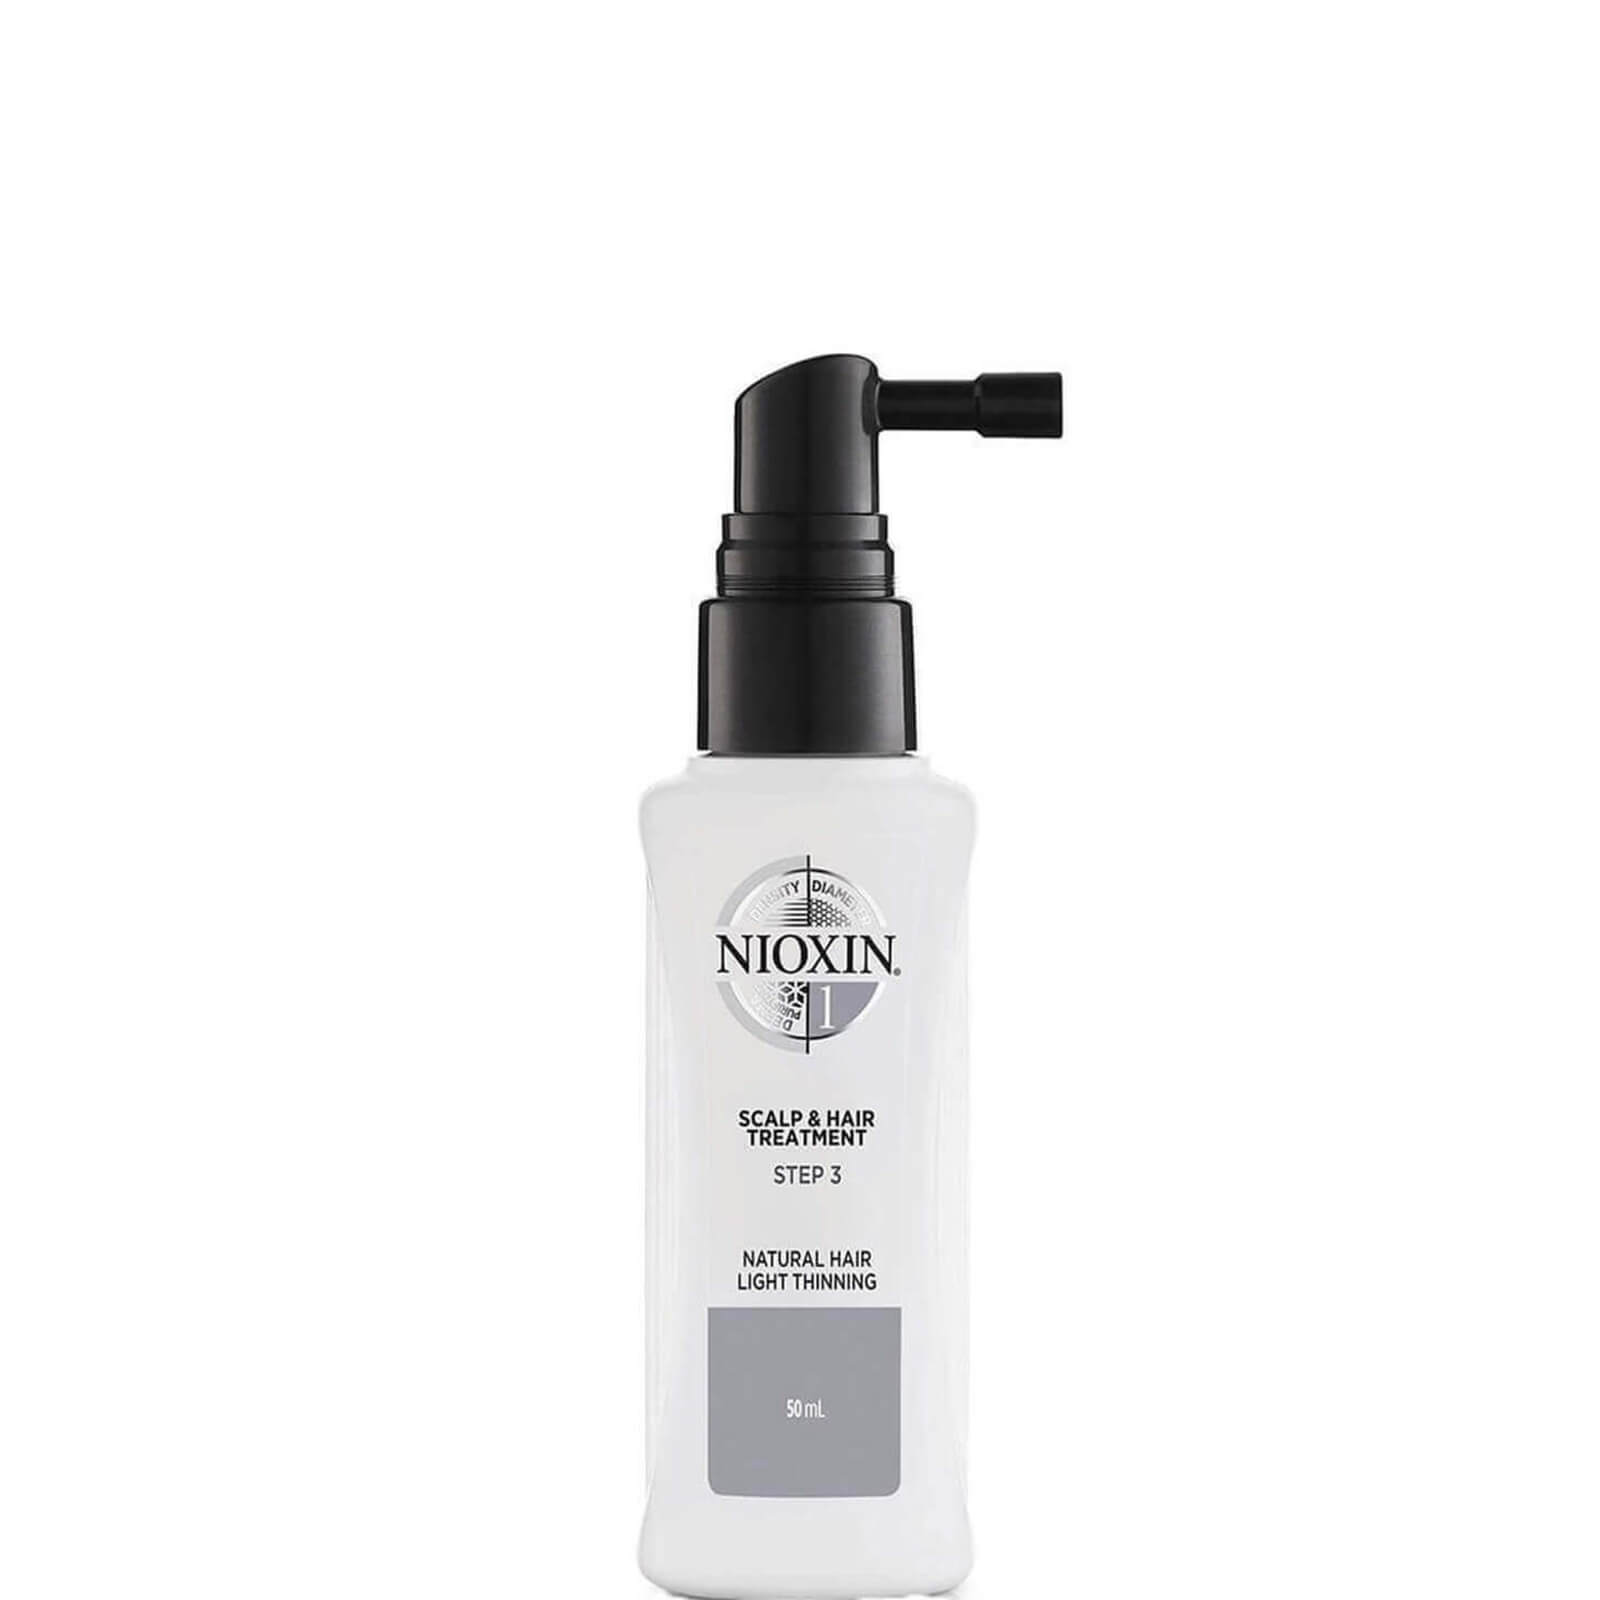 3-Part Scalp and Hair Care System in 1 for Natural Hair with Slight Thinning NIOXIN 100ml